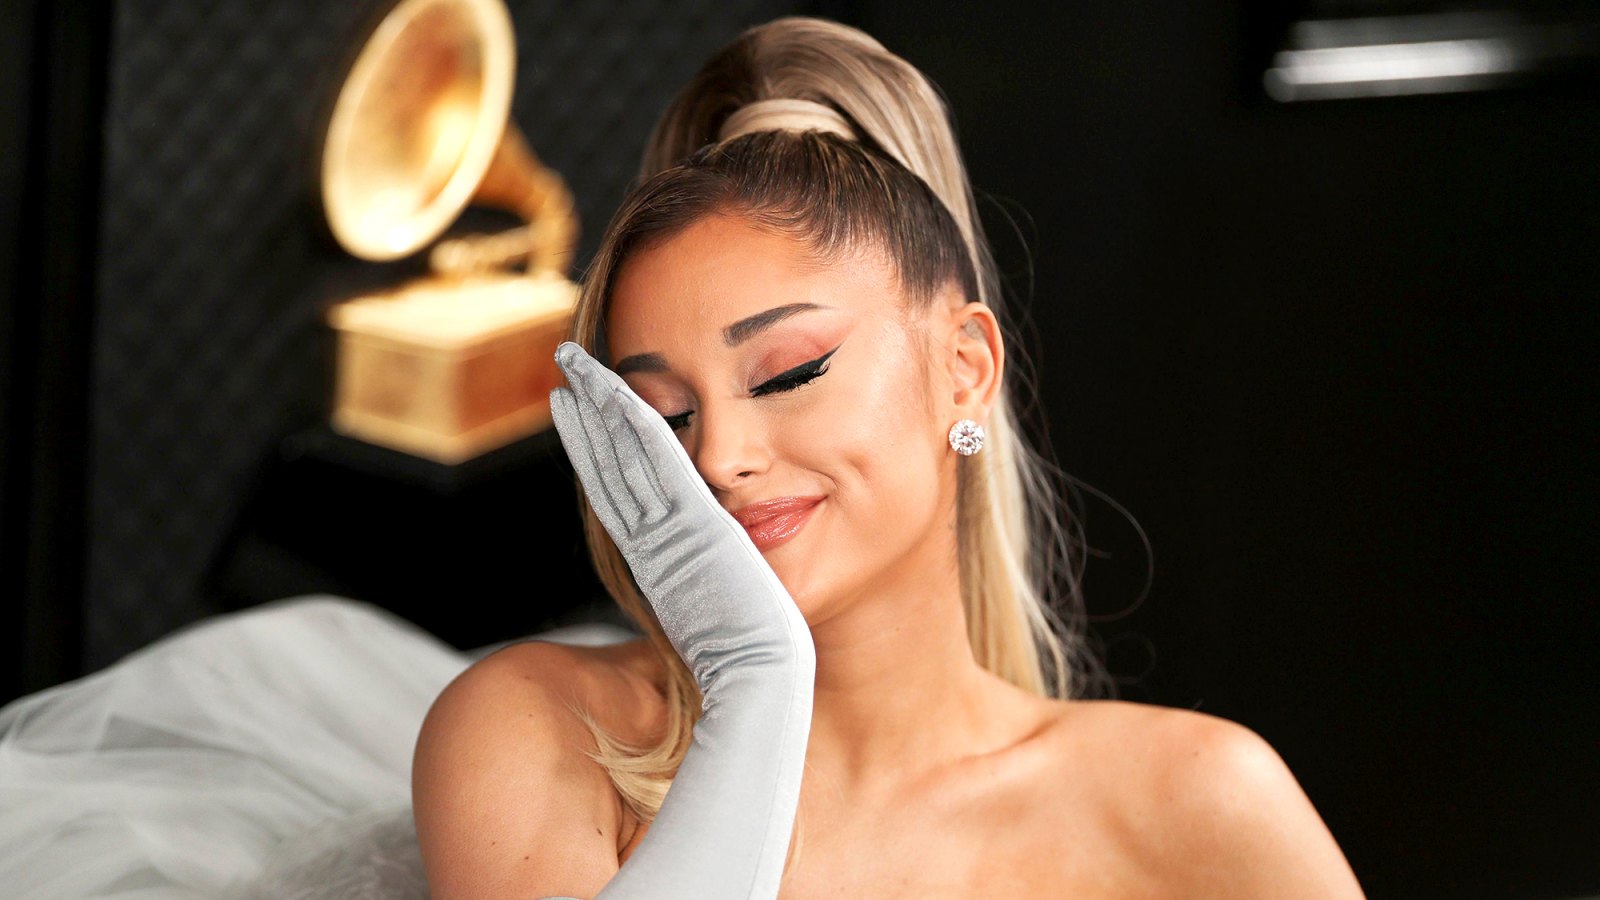 Ariana-Grande-Hilariously-Responds-to-Meme-About-Washing-Hands